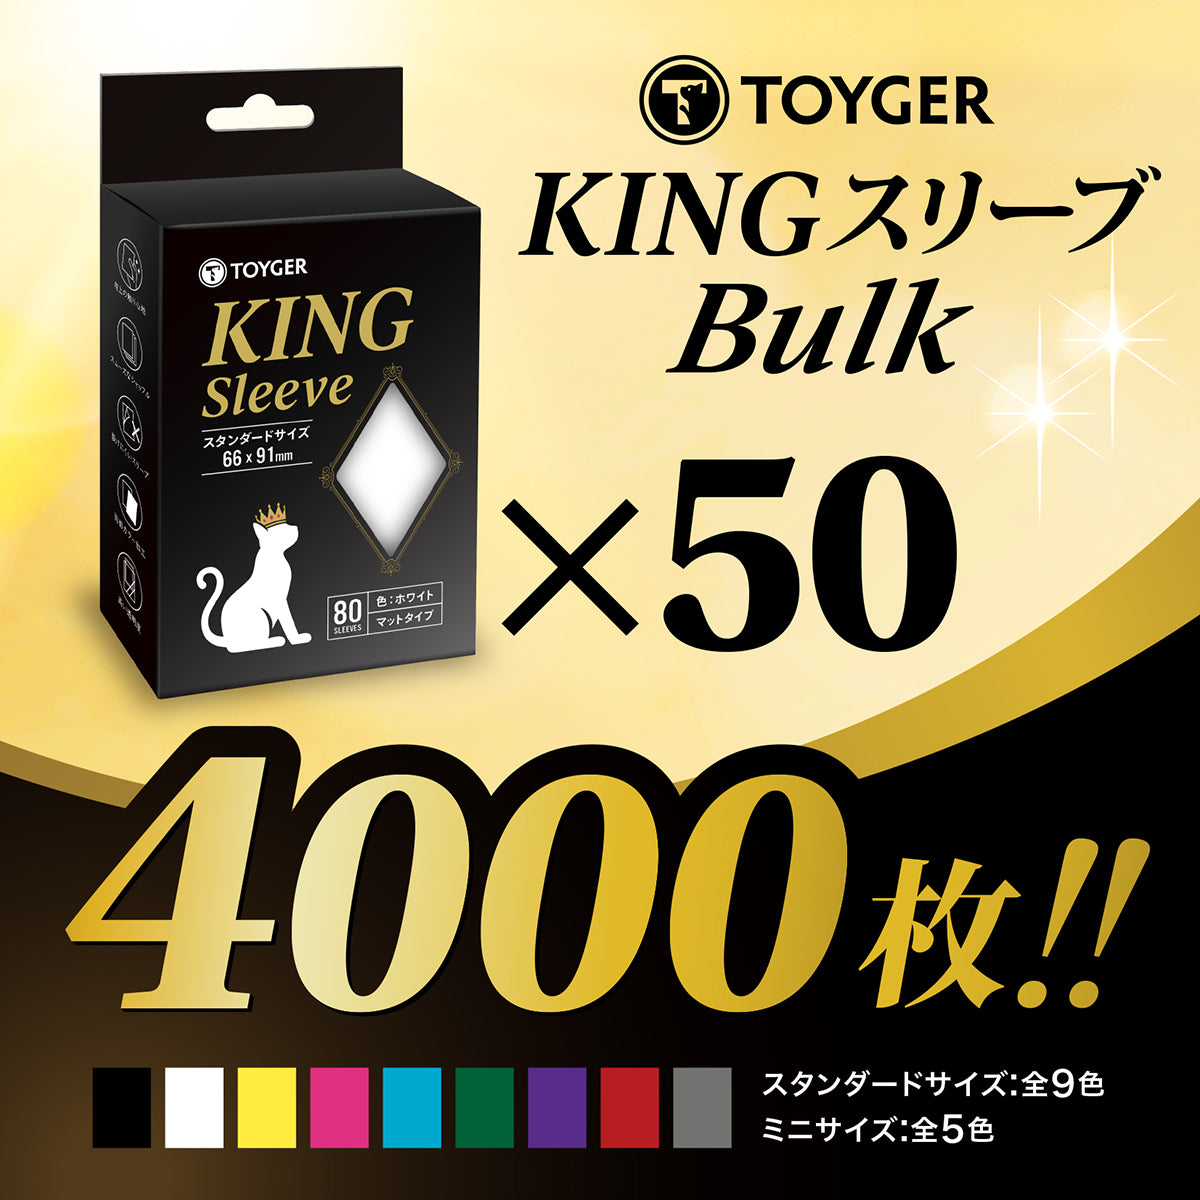 TOYGER KING's Outer Sleeve